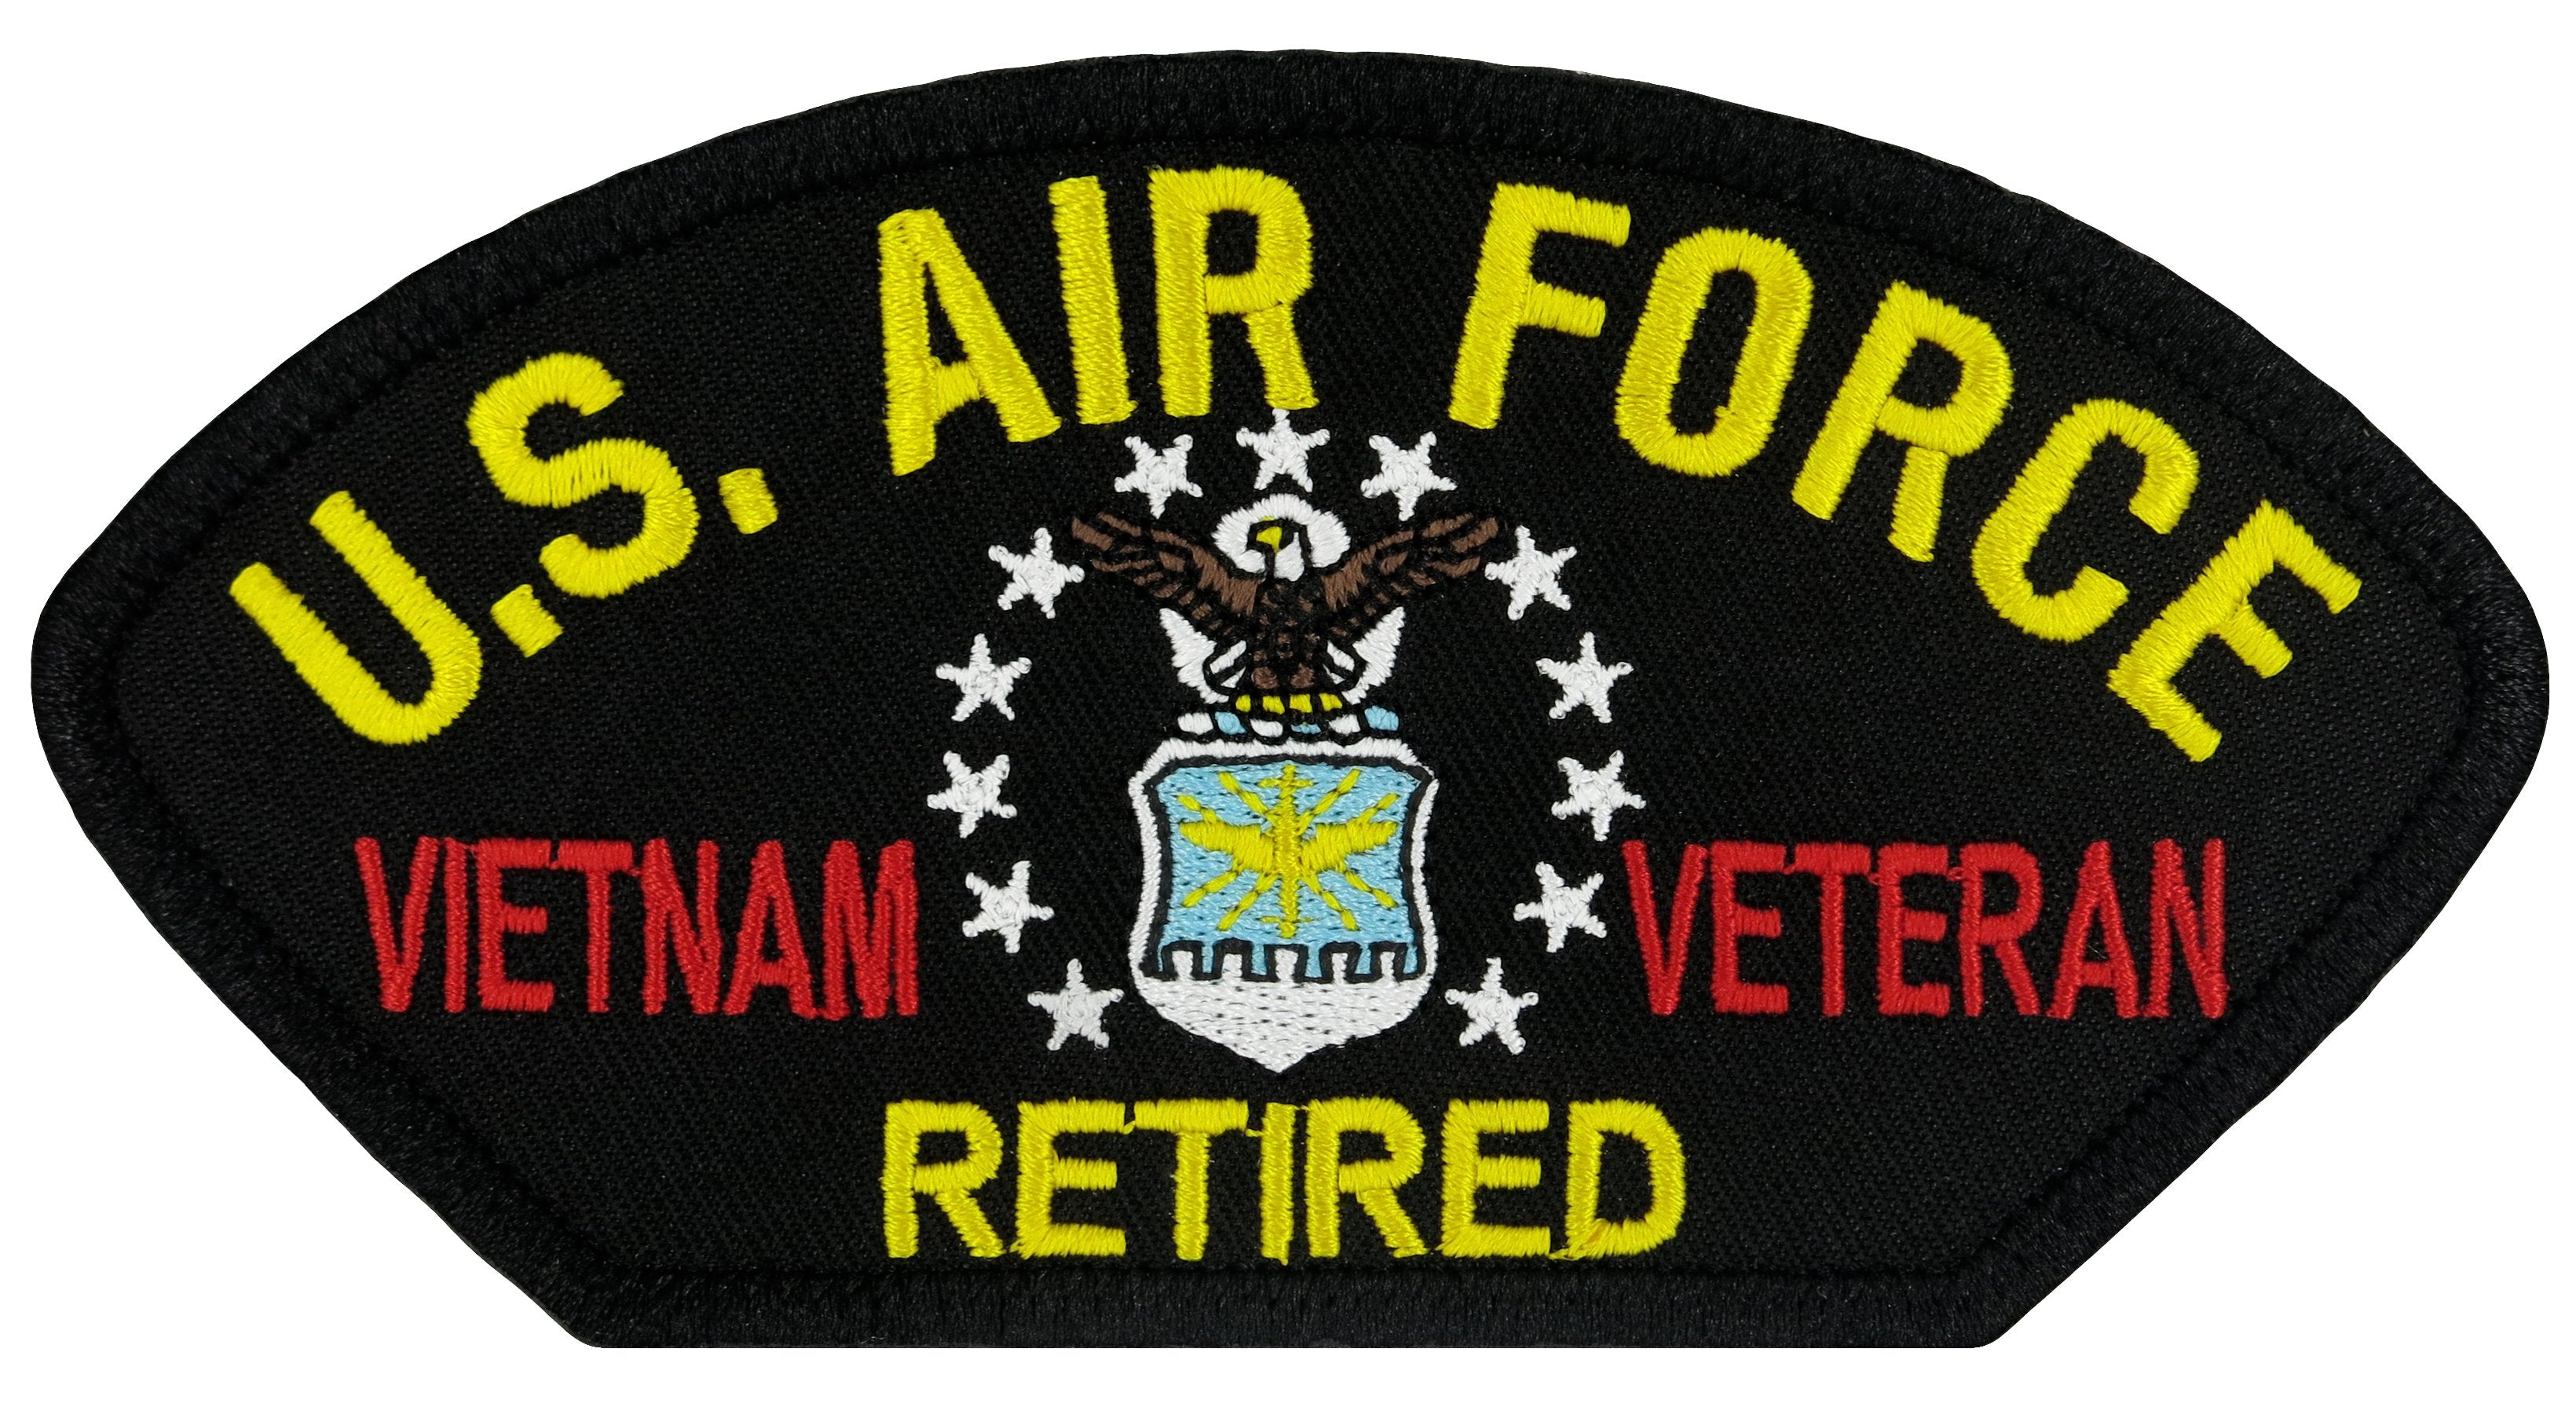 US Air Force Vietnam War Veteran Retired Embroidered Patch 5 3/16" x 2 5/8"